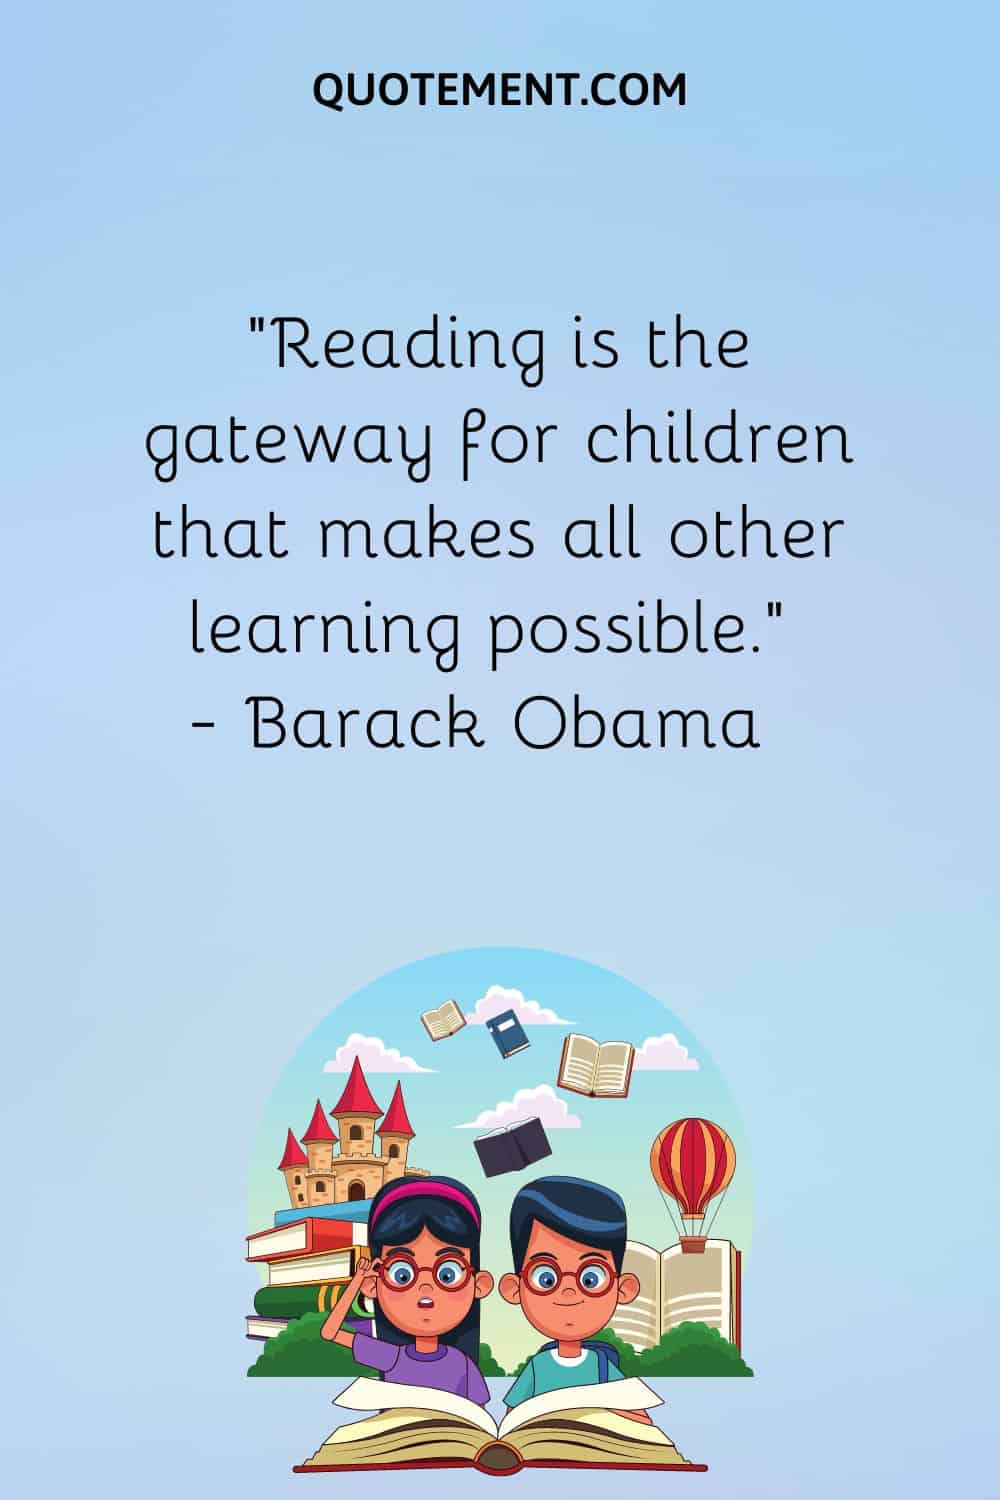 “Reading is the gateway for children that makes all other learning possible.” — Barack Obama